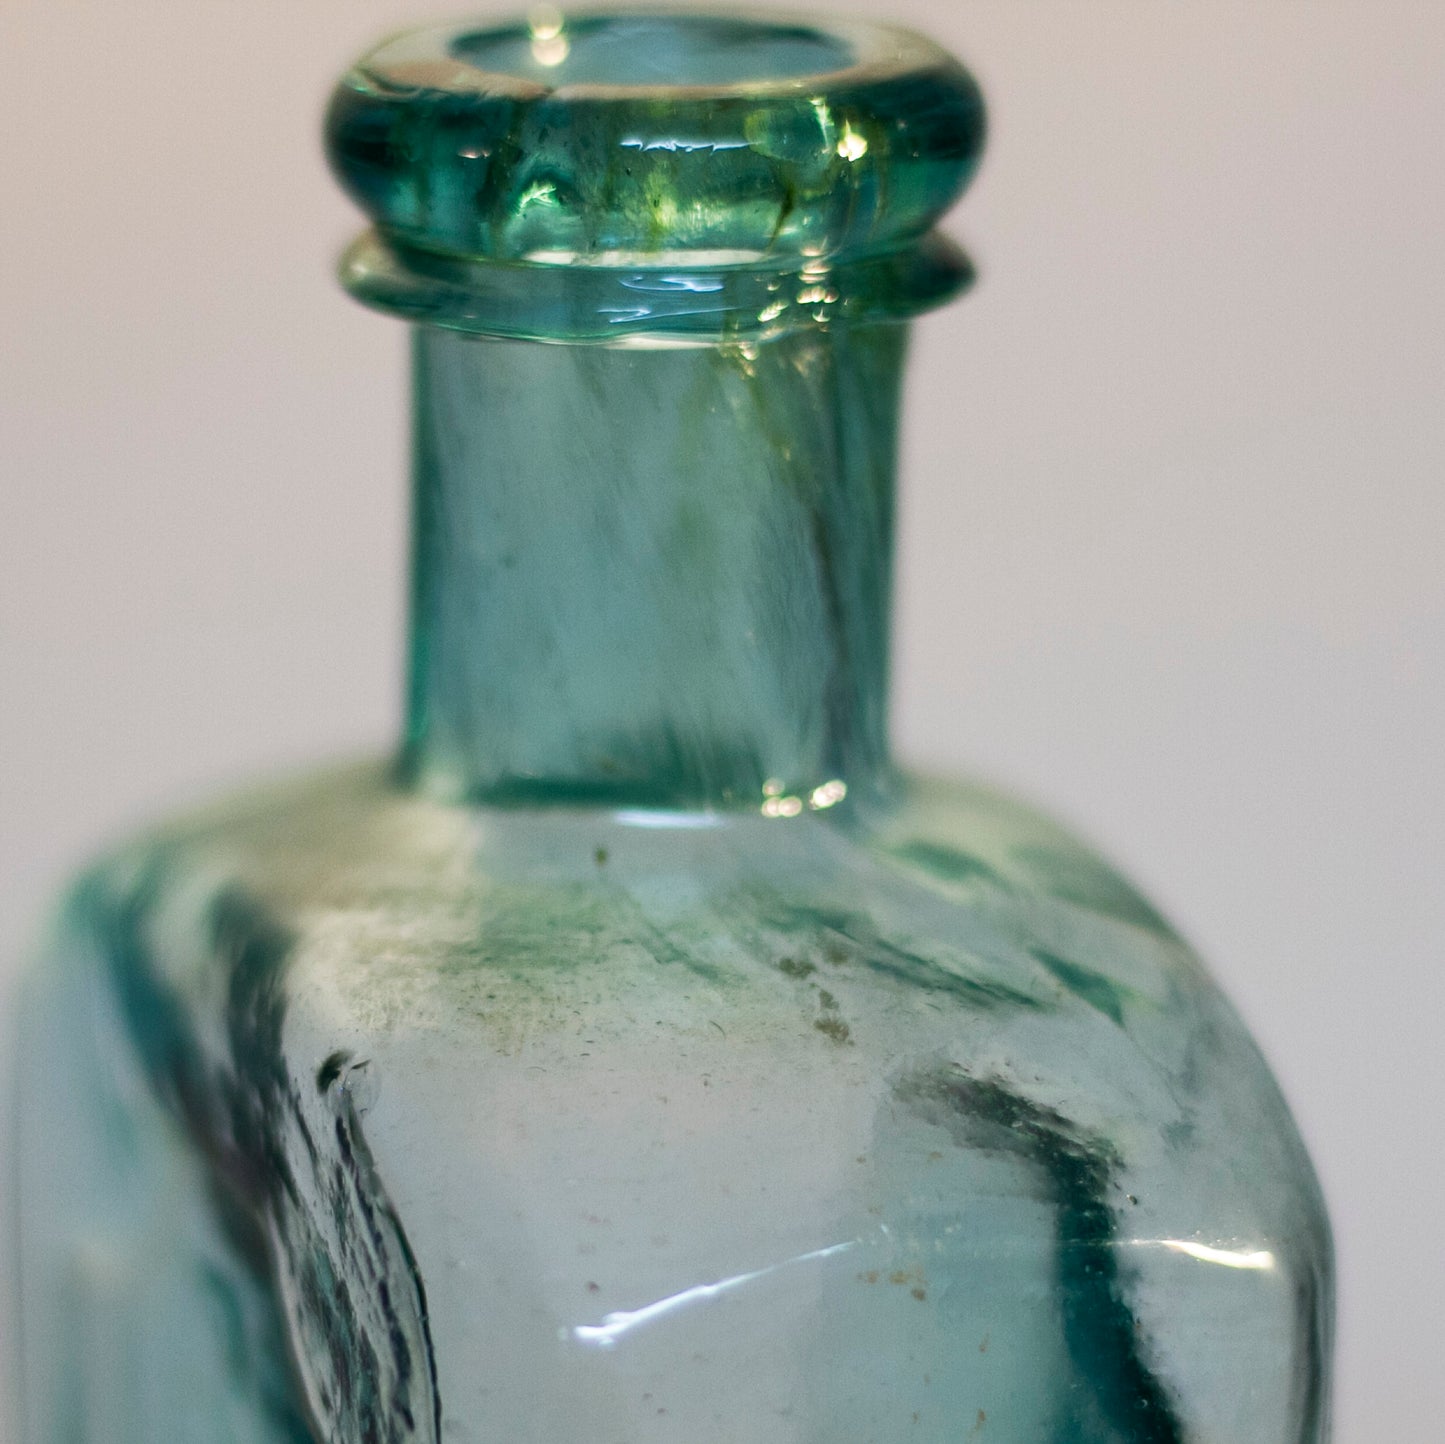 Early HALL'S BALSAM FOR THE LUNGS Aqua Glass Bottle Circa 1860 - 1870